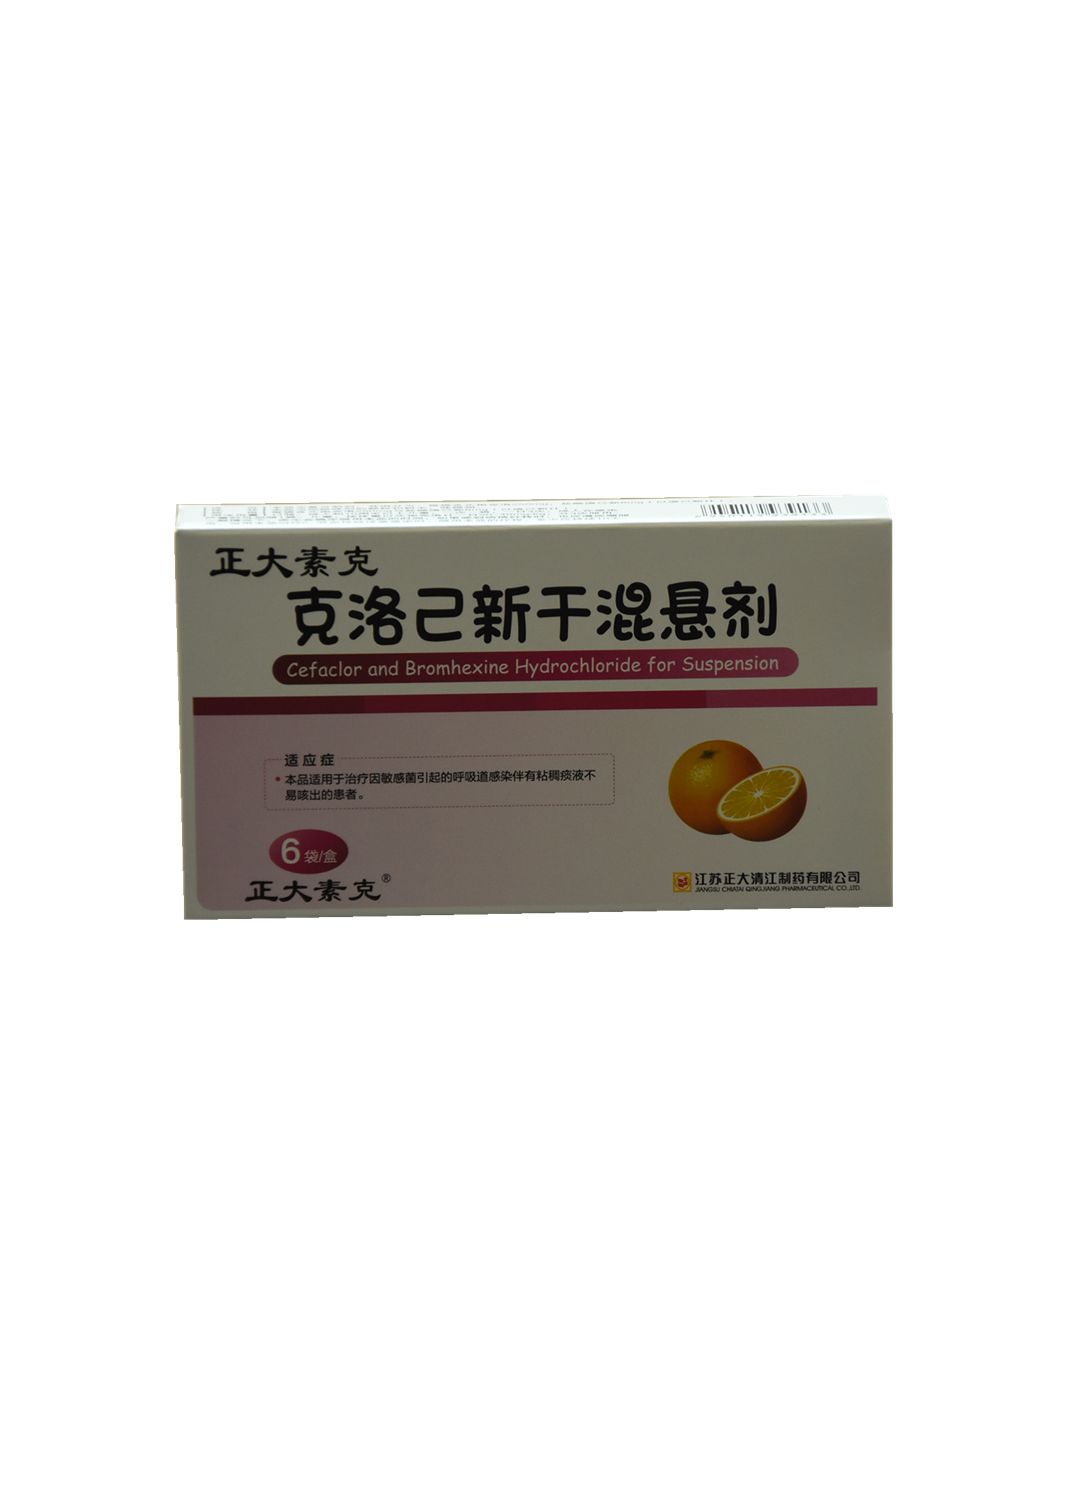 Cefaclor and Bromhexine Hydrochloride for Suspenion